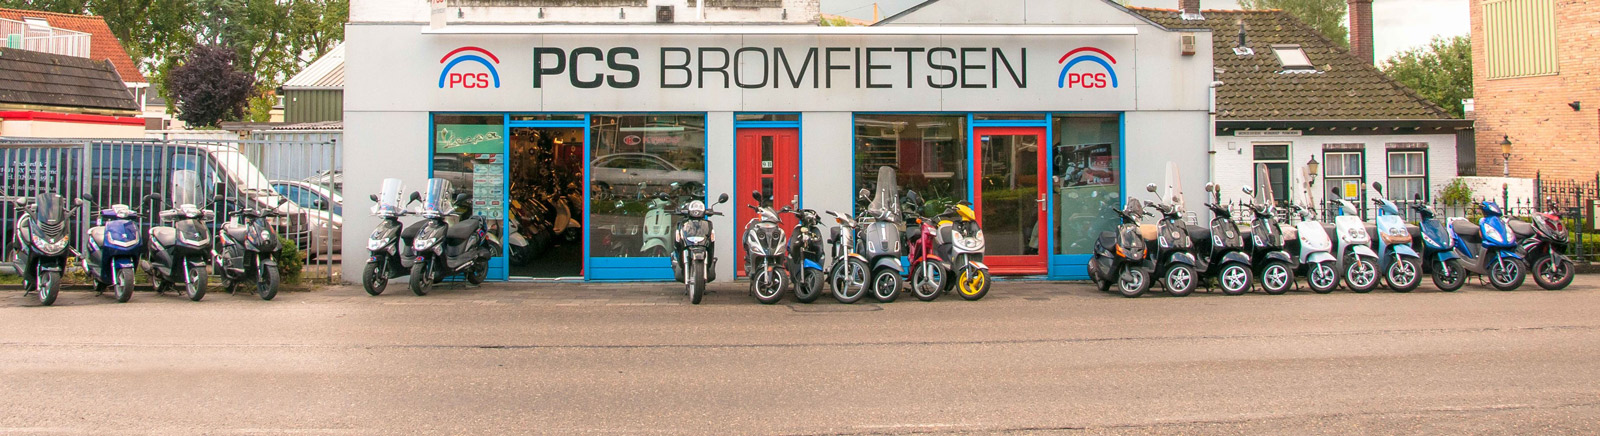 PCS Brommers, Scooters & Motorscooters in Purmerend